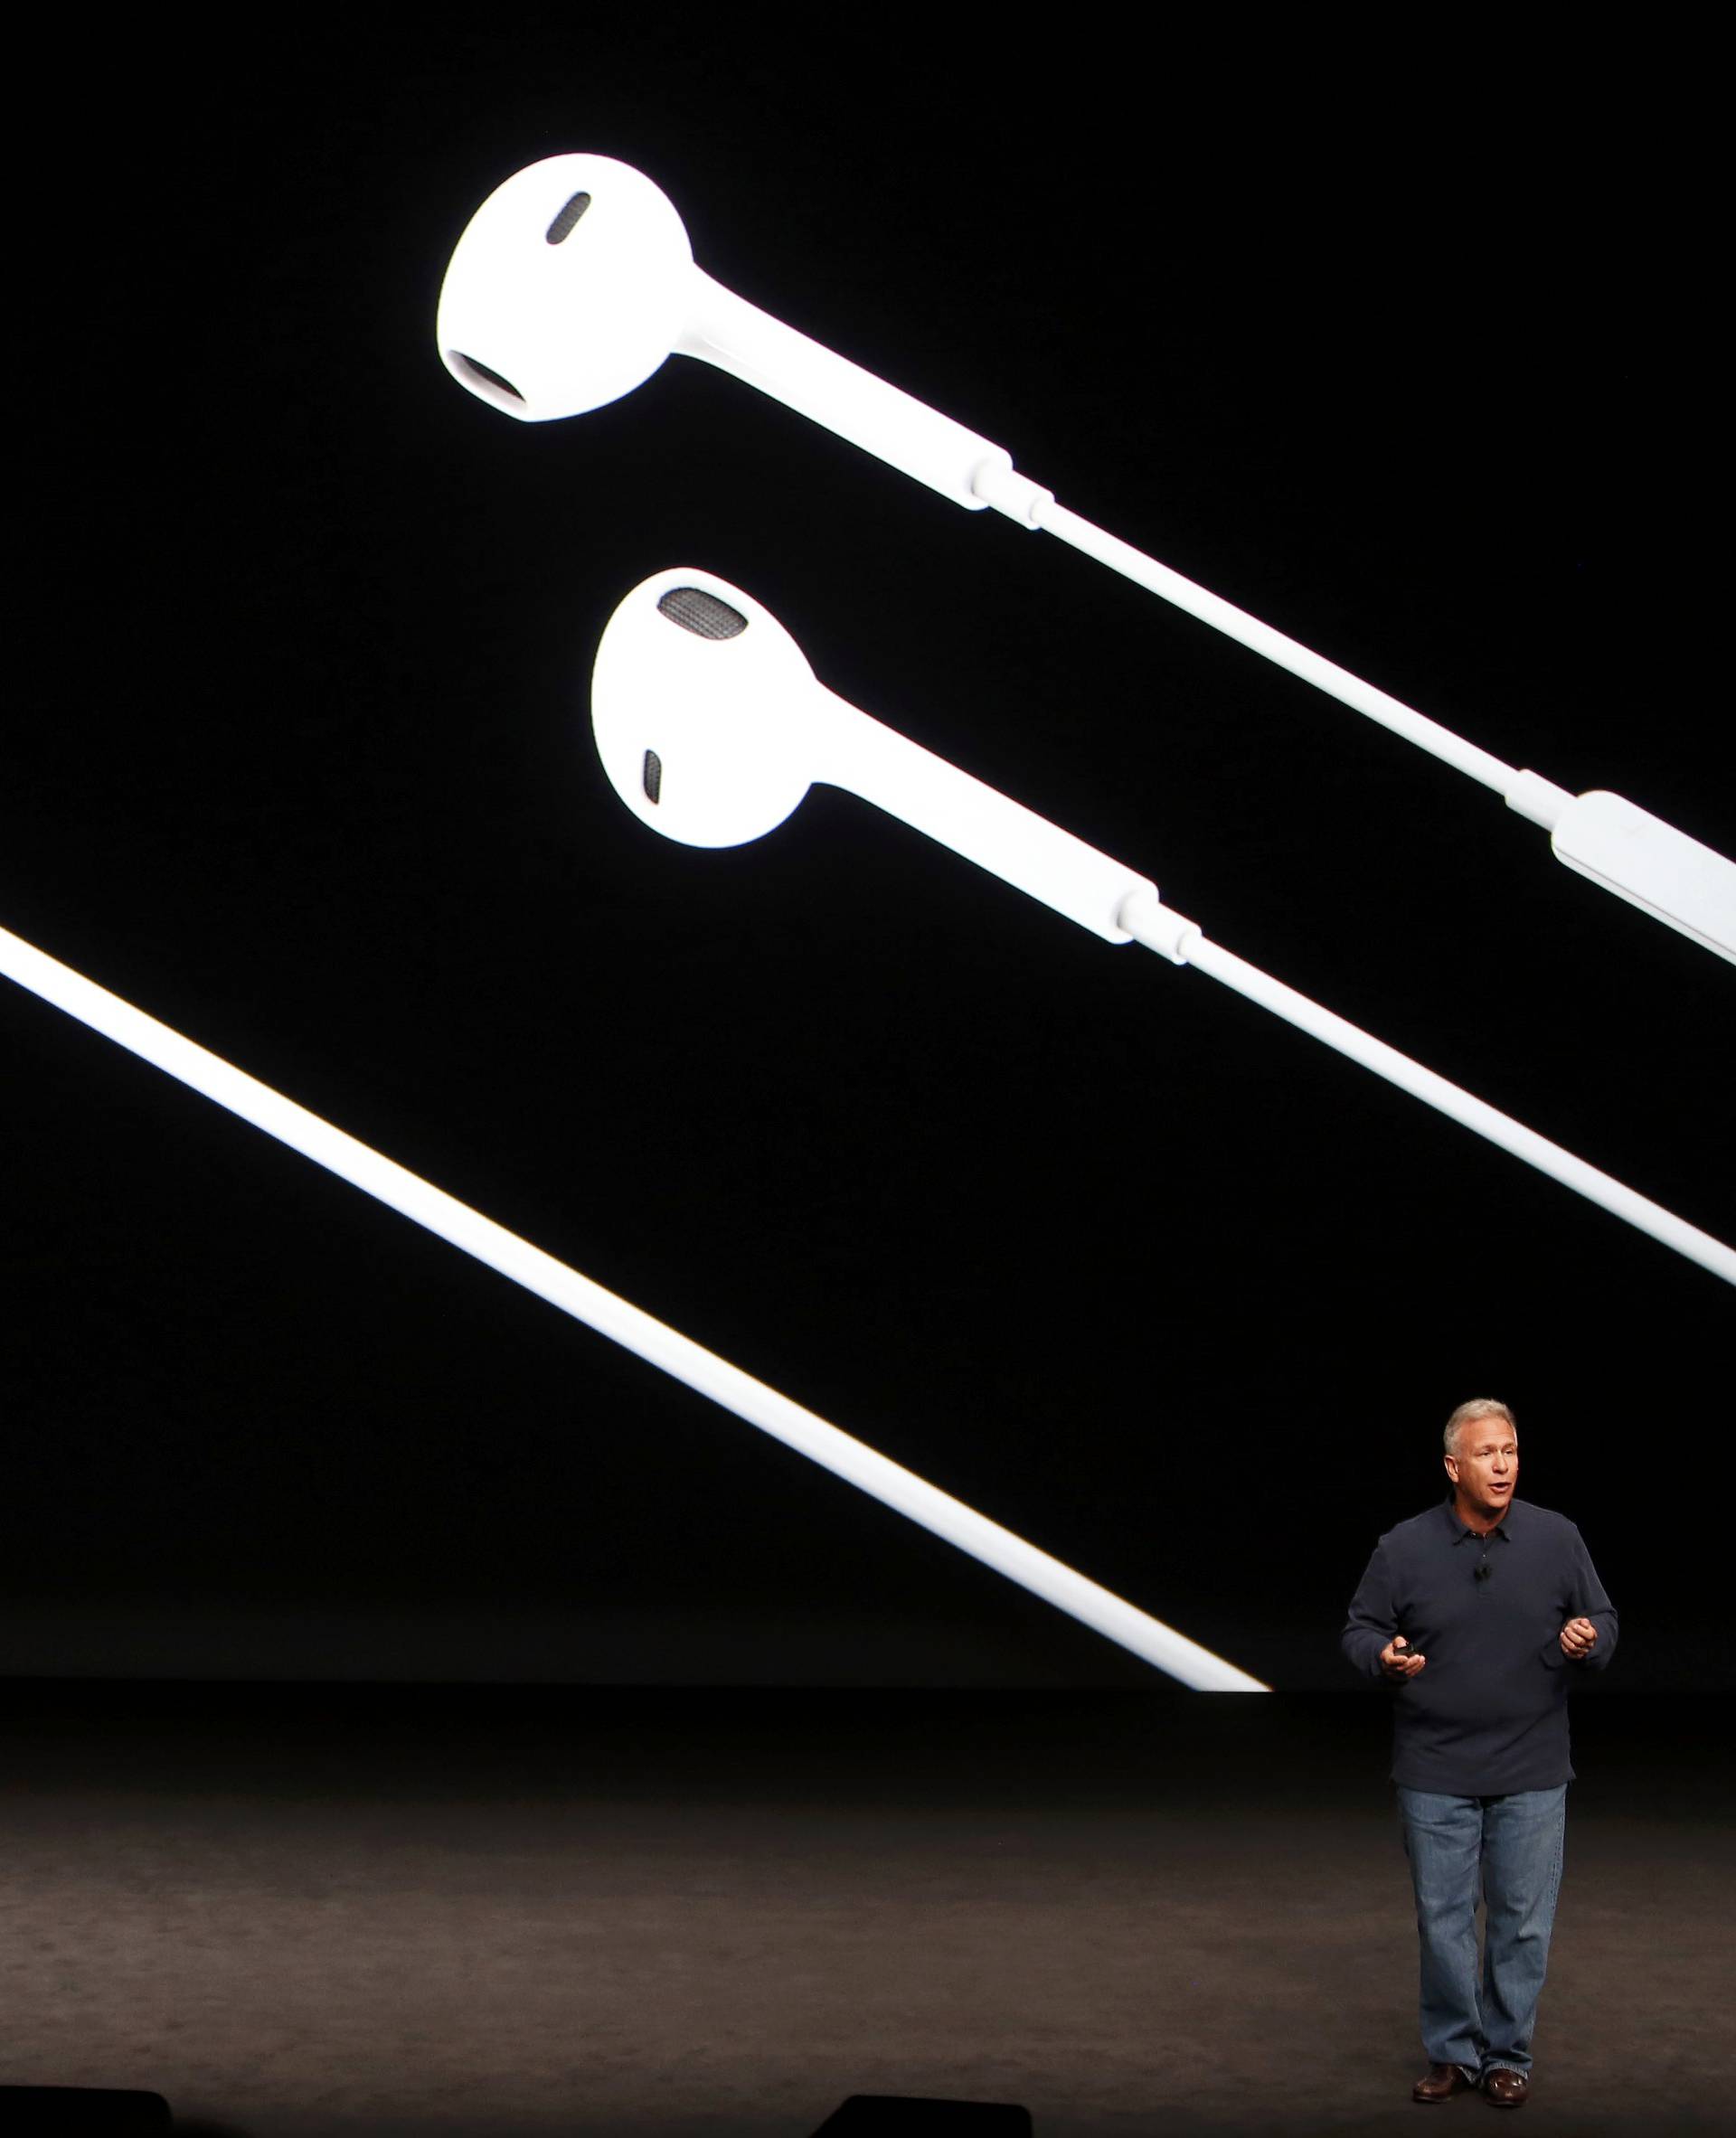 Phil Schiller discusses the audio features of the iPhone7 during a media event in San Francisco